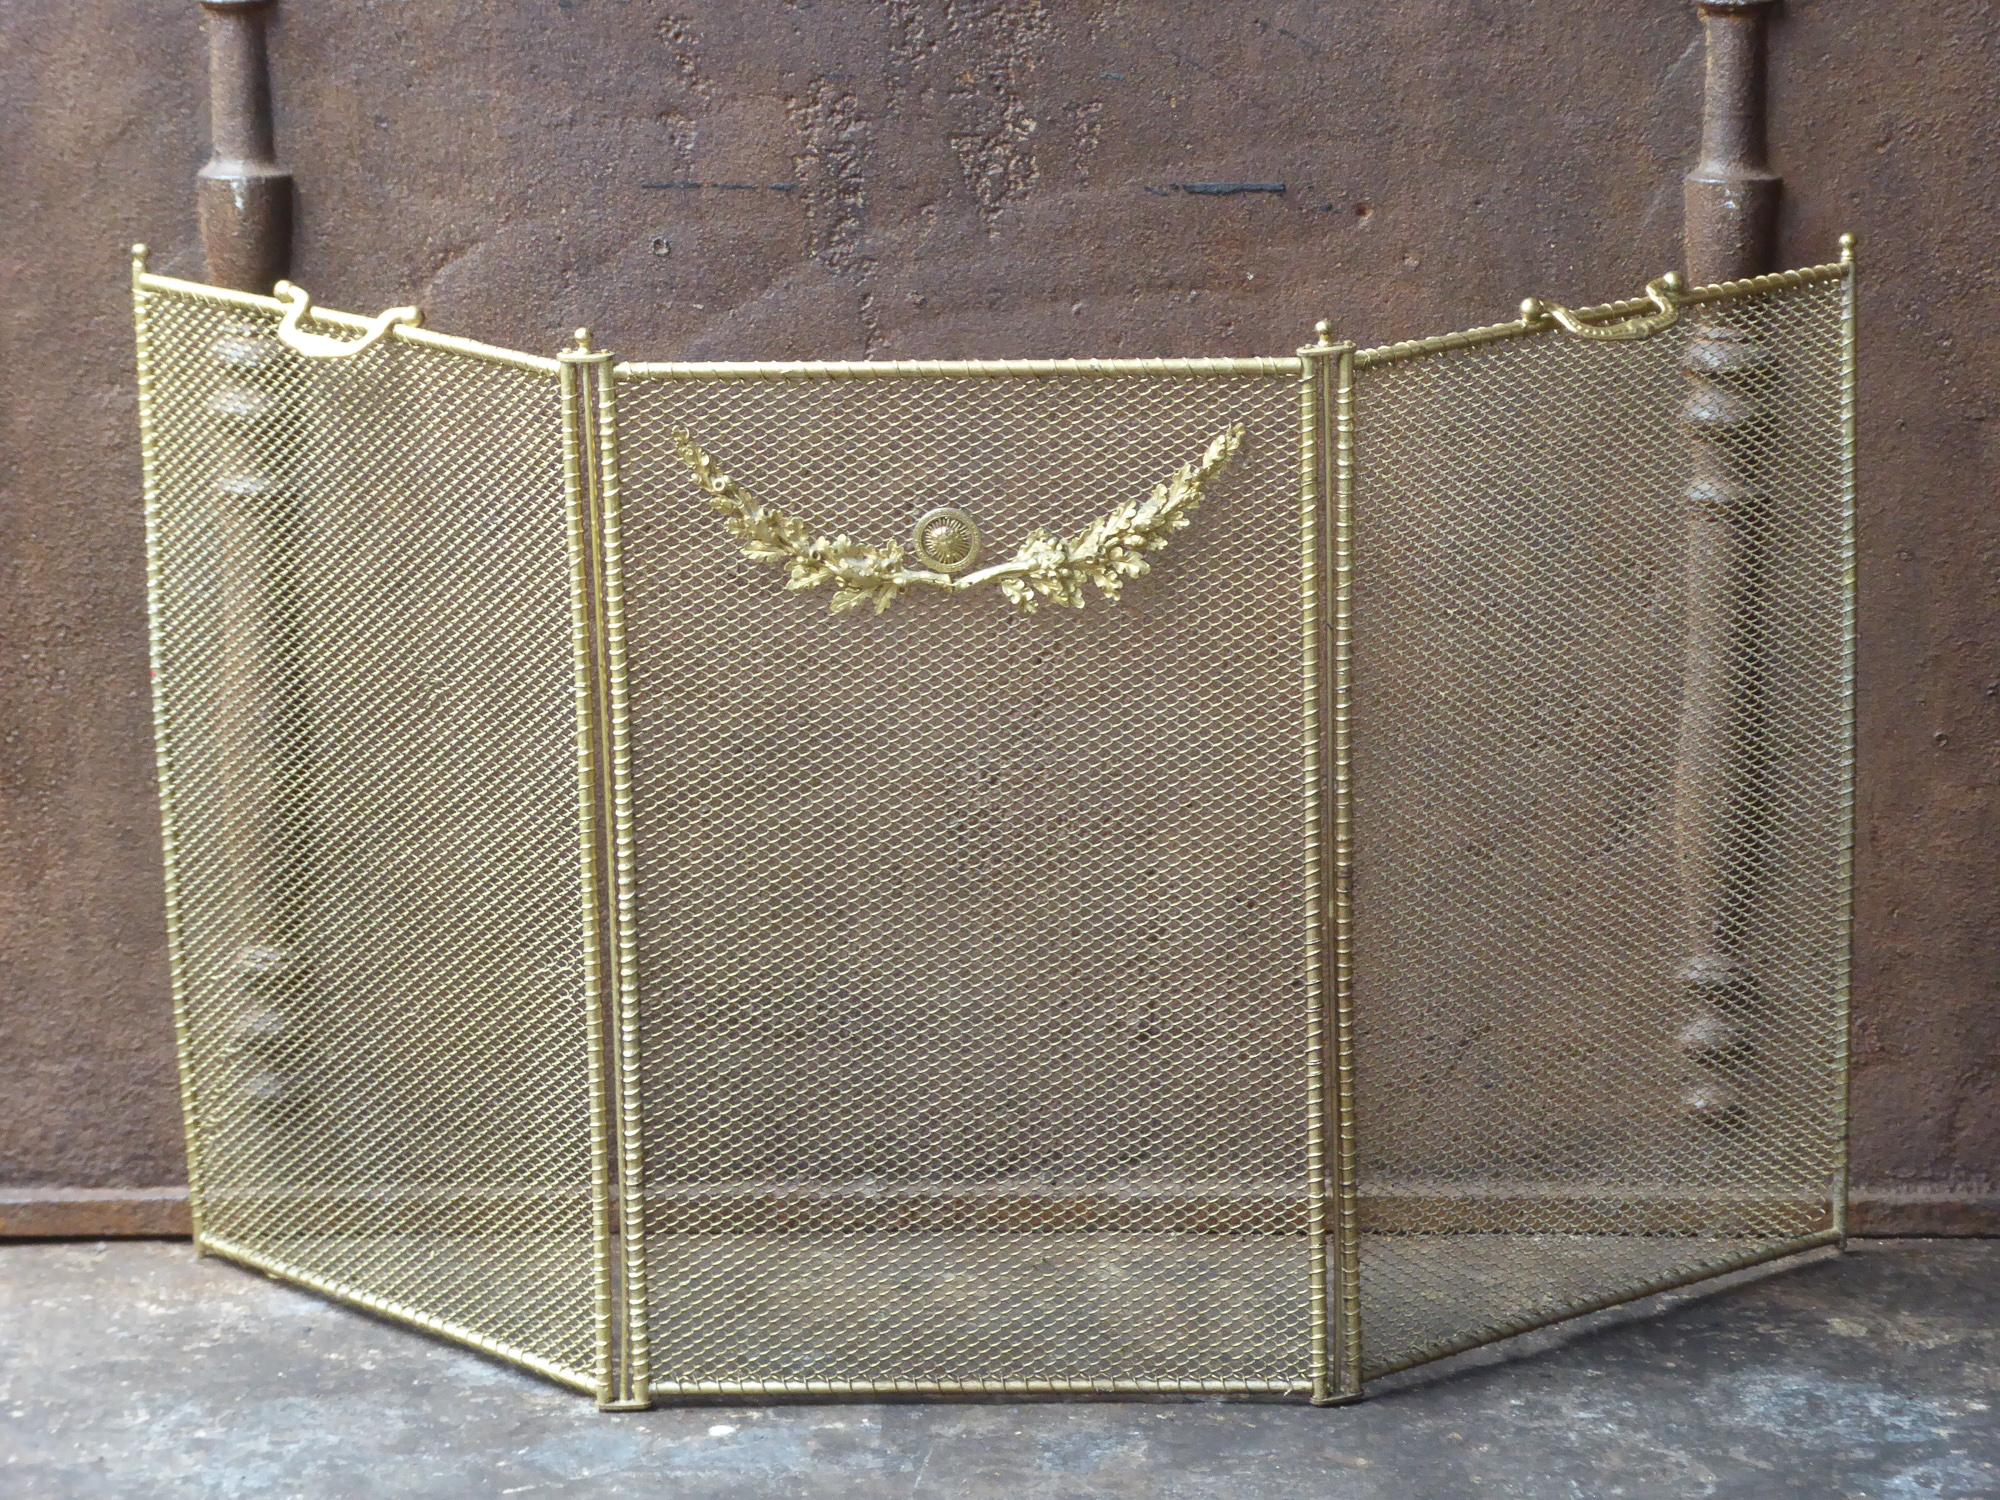 19th century French Napoleon III fireplace screen made of iron and iron mesh.







